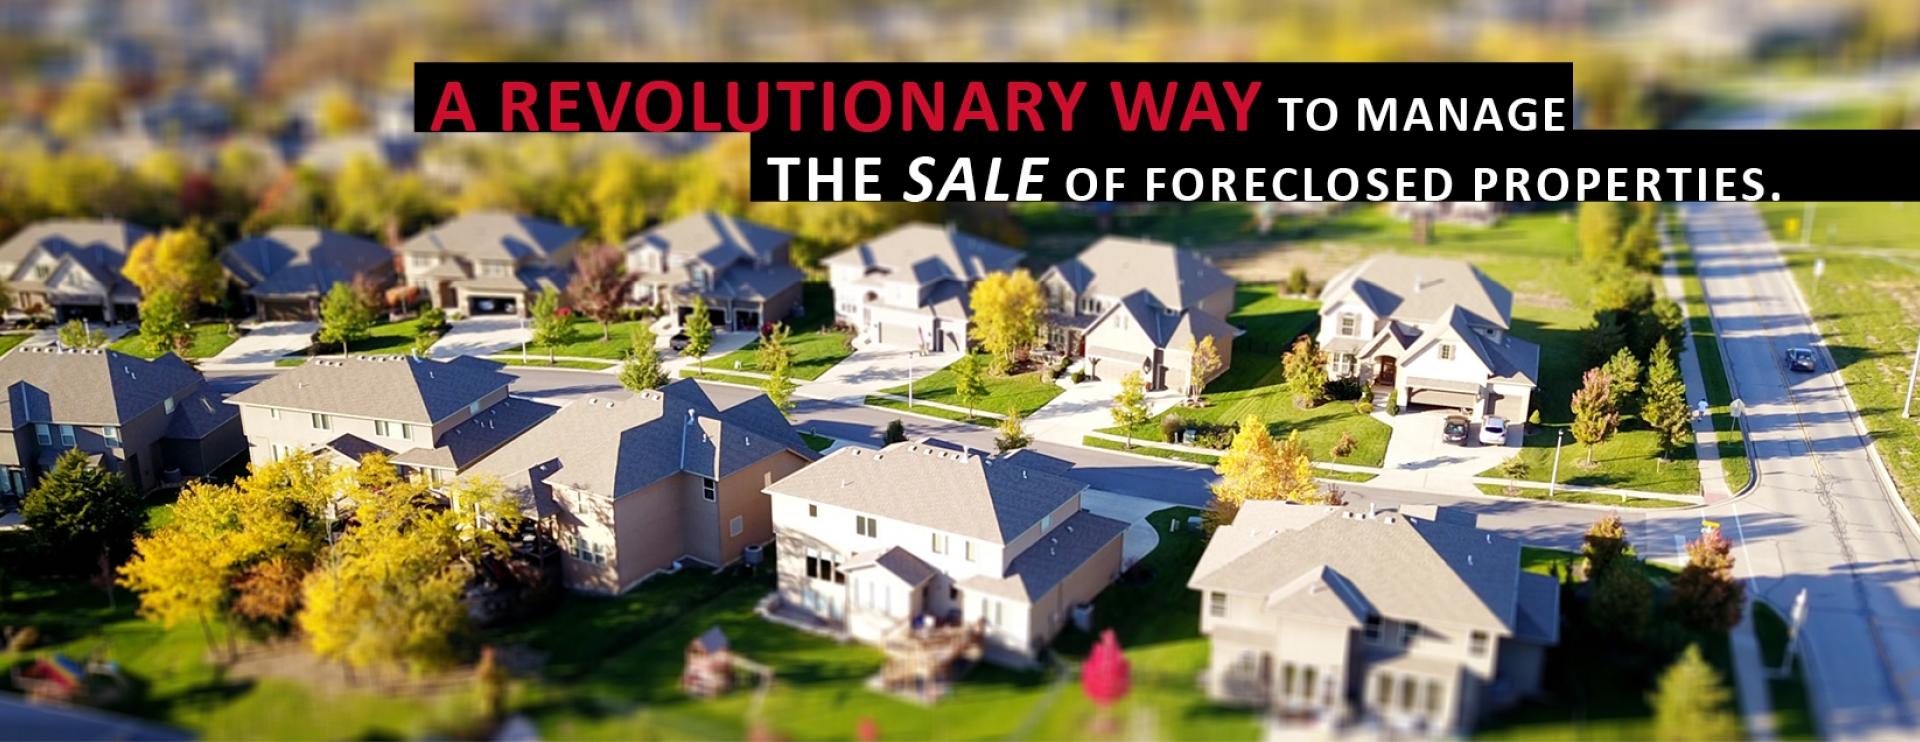 A revolutionary way to manage the sale of foreclosed properties.